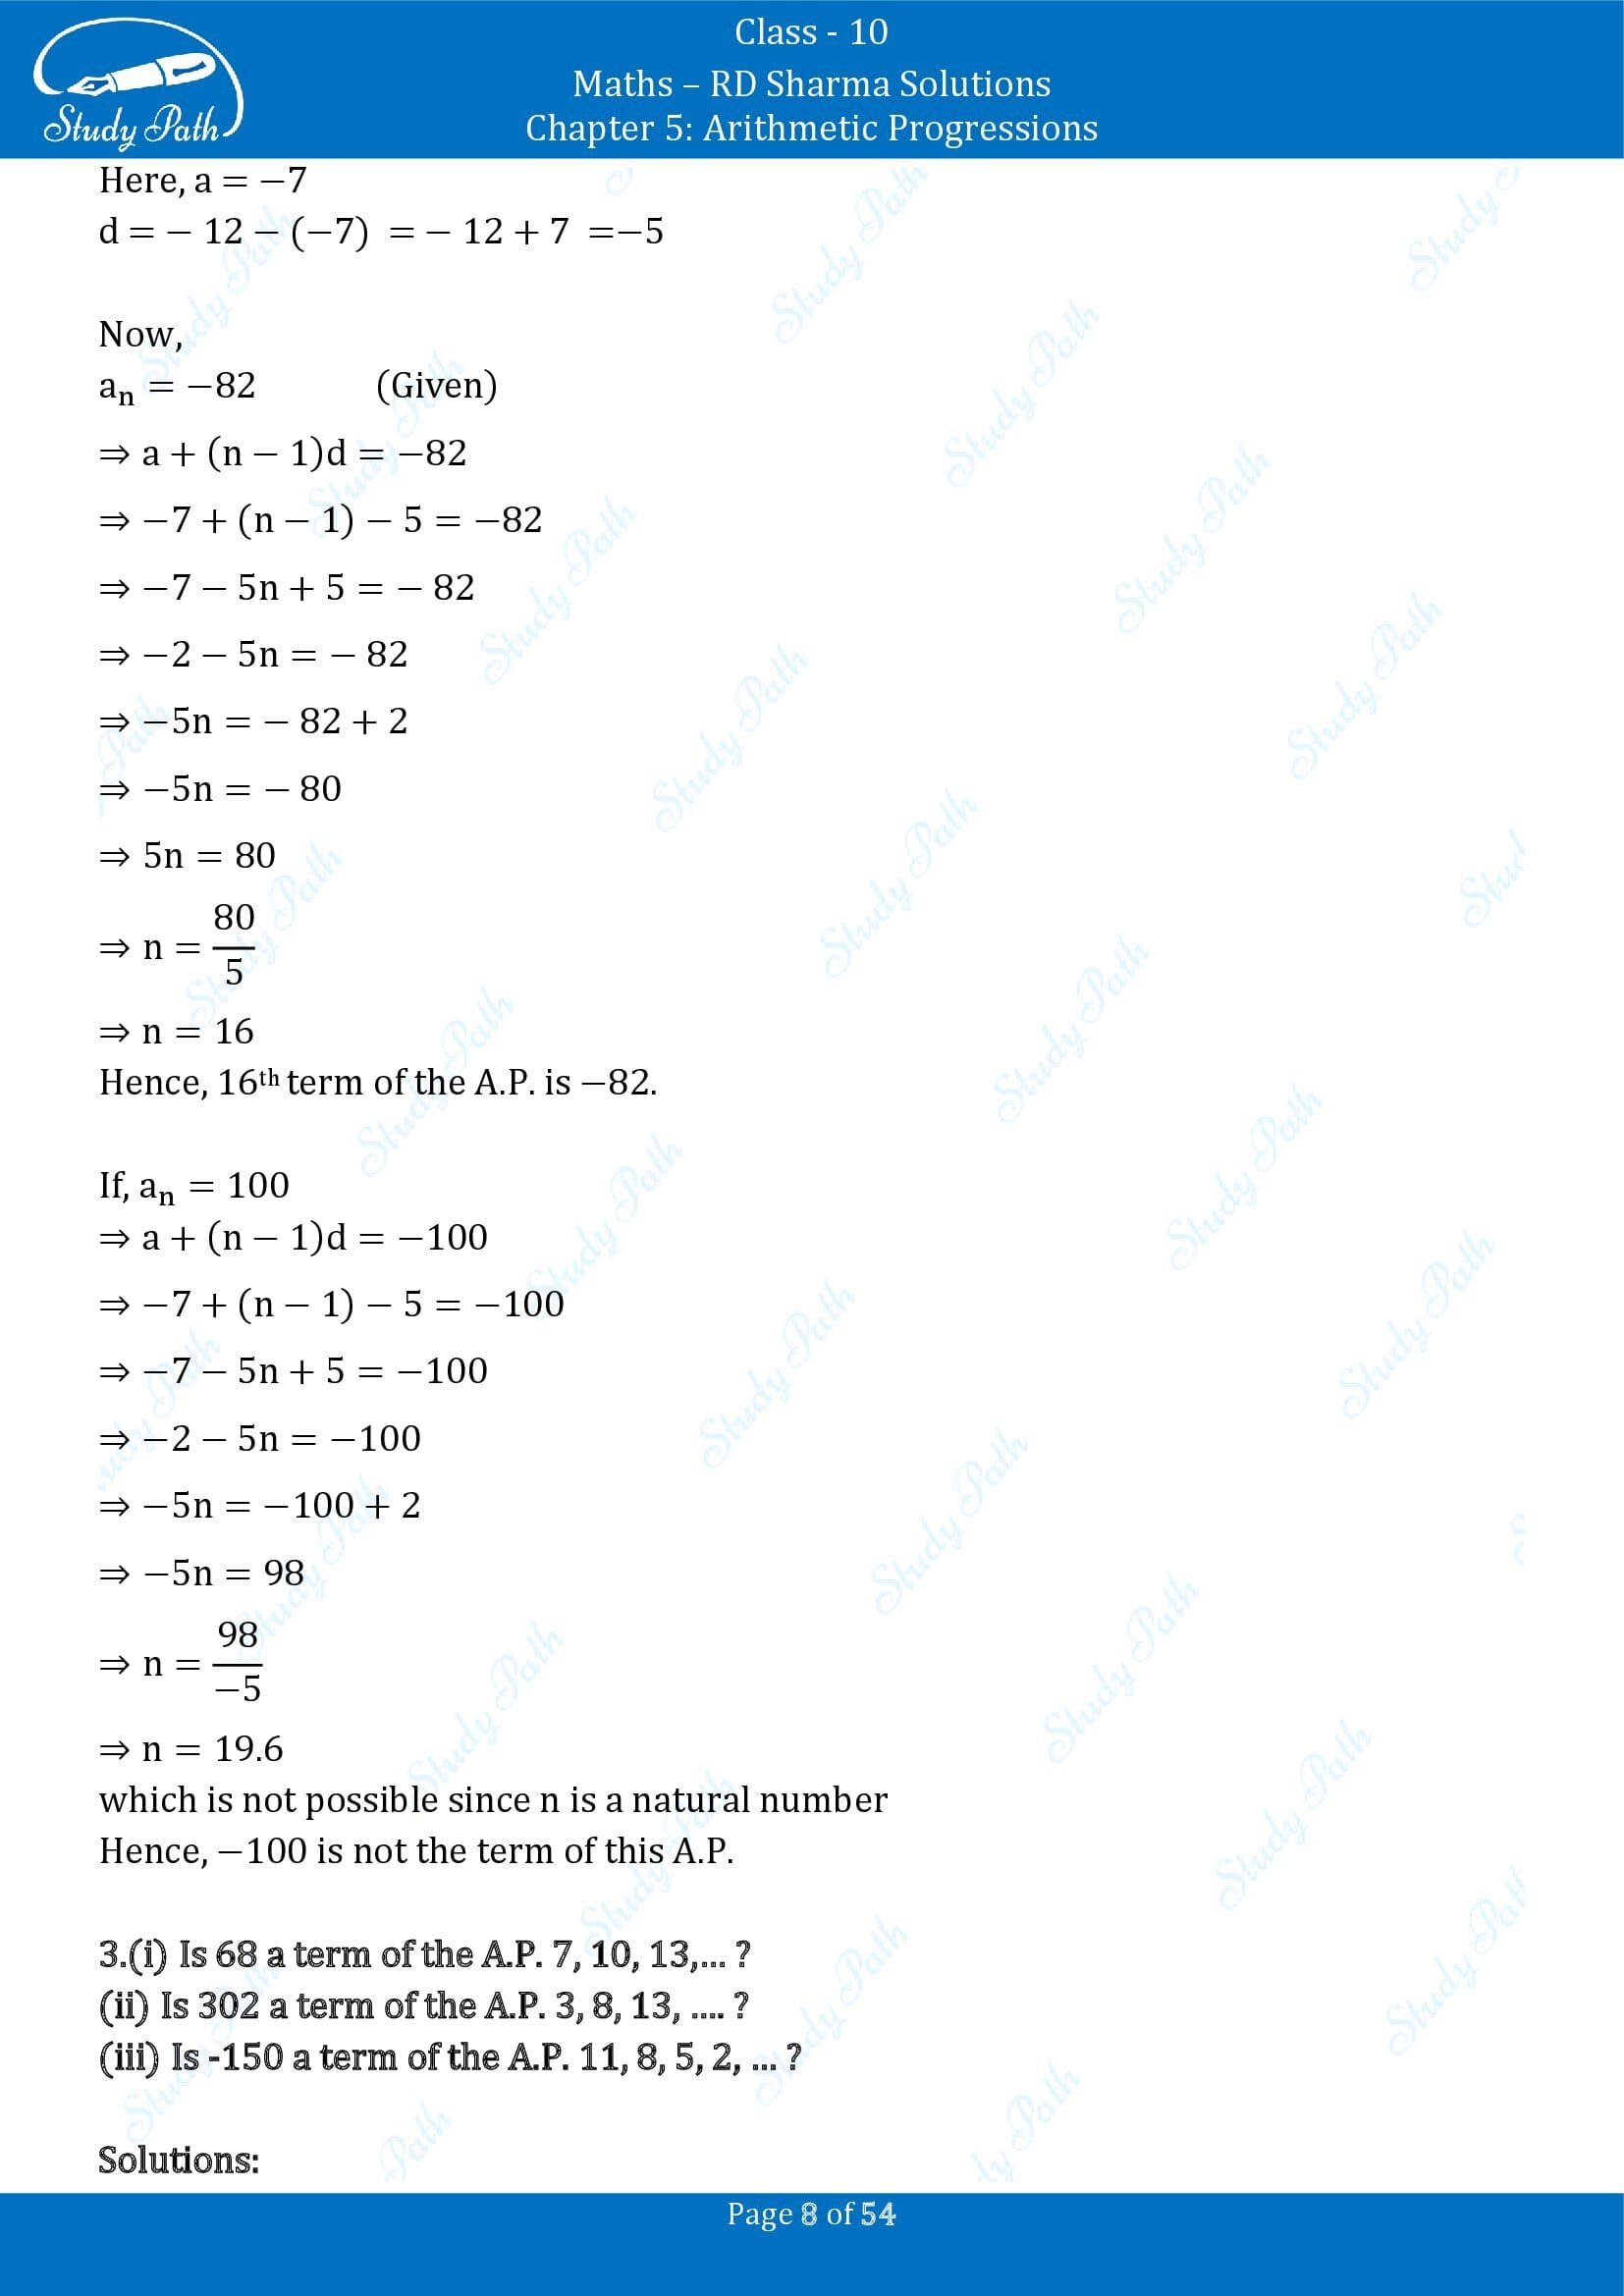 RD Sharma Solutions Class 10 Chapter 5 Arithmetic Progressions Exercise 5.4 00008